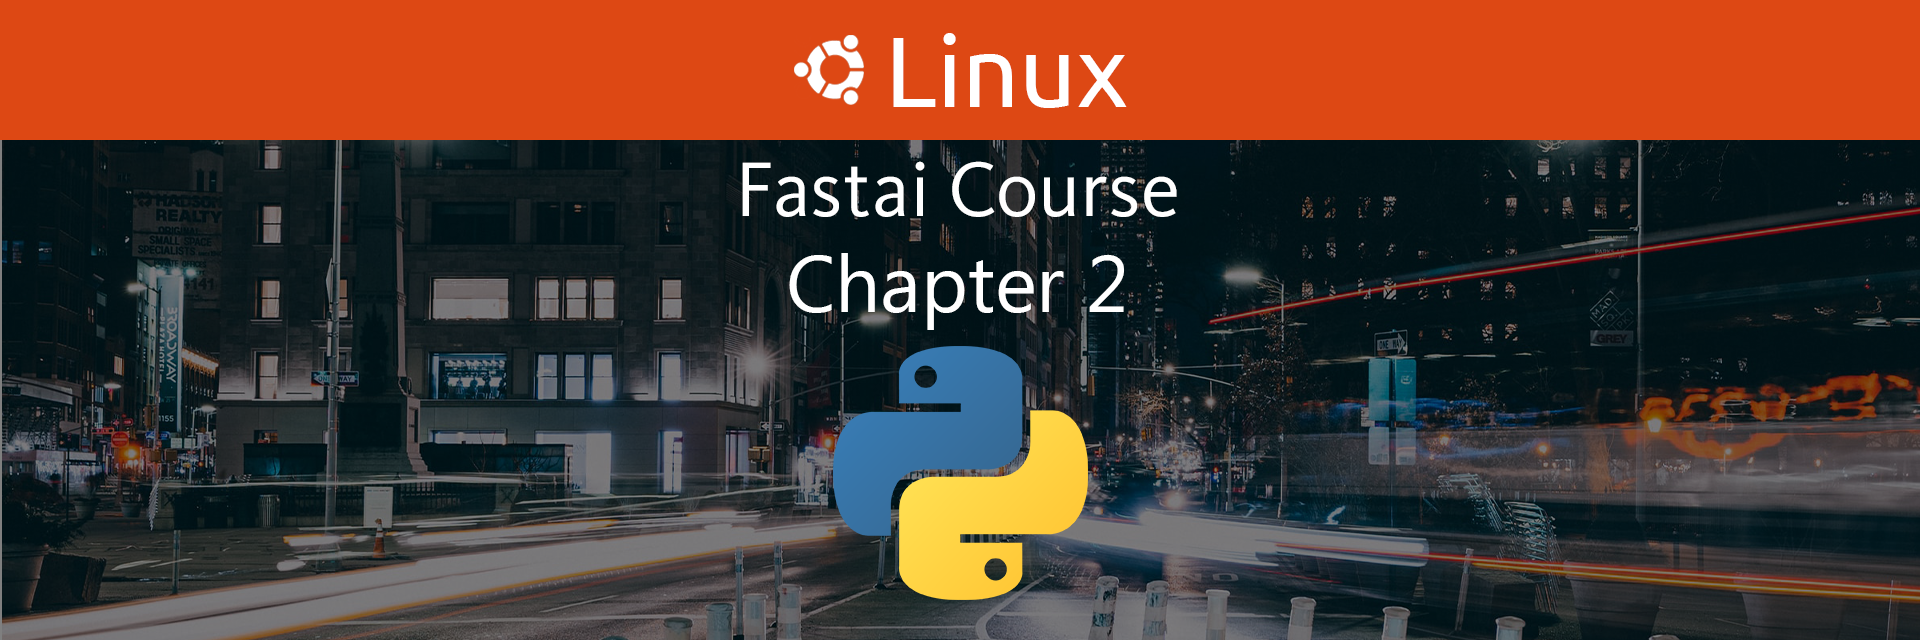 Fastai Course Chapter 2 on Linux